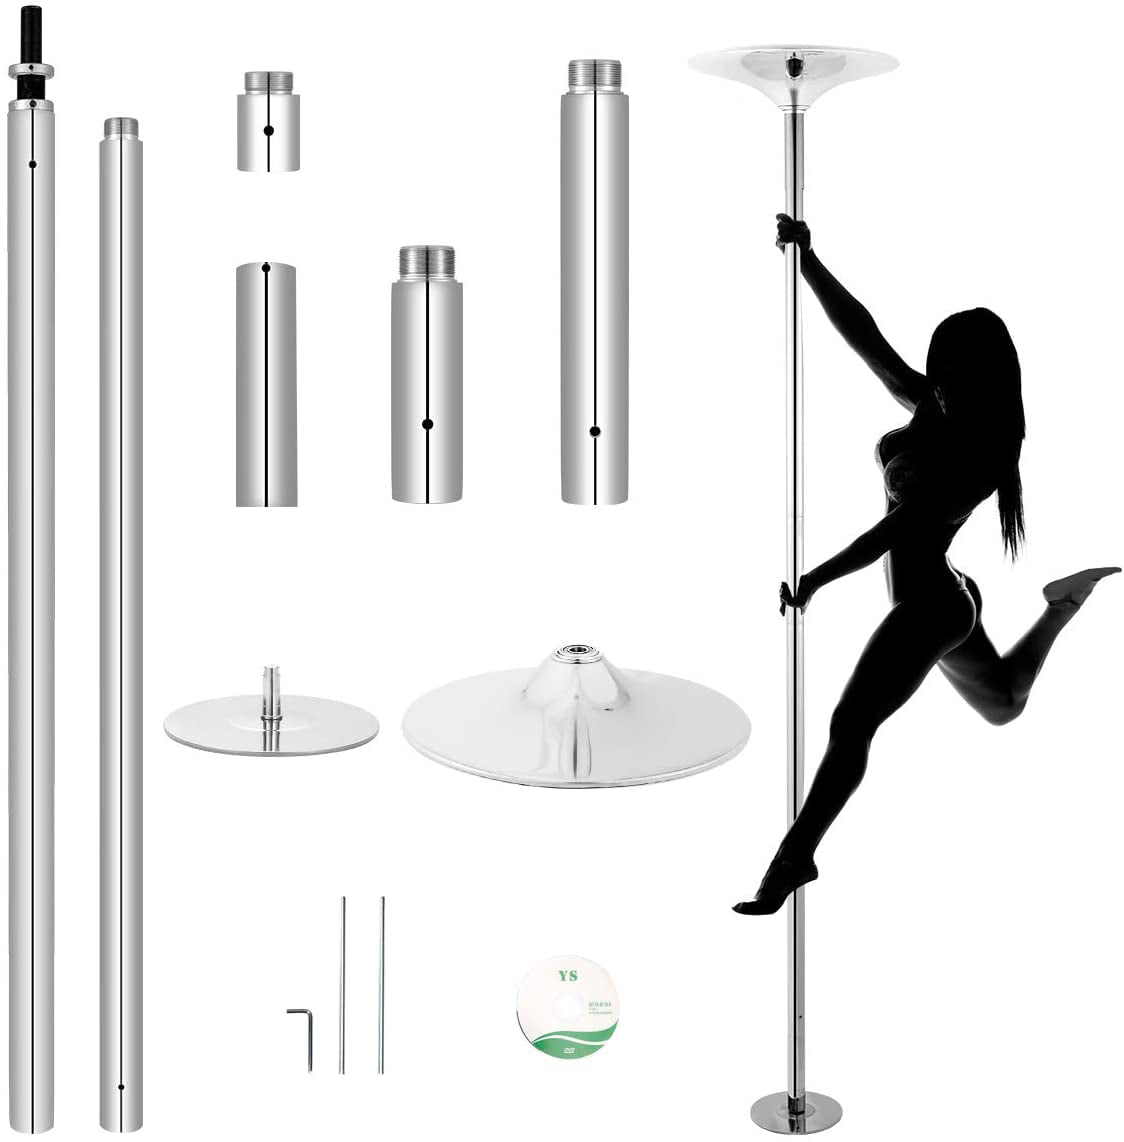 Portable Removable Pole Kit for Home Gym Club Bar JoyHousey Dancing Pole Professional Spinning Static Pole Dance with Adjustable Height Silver 